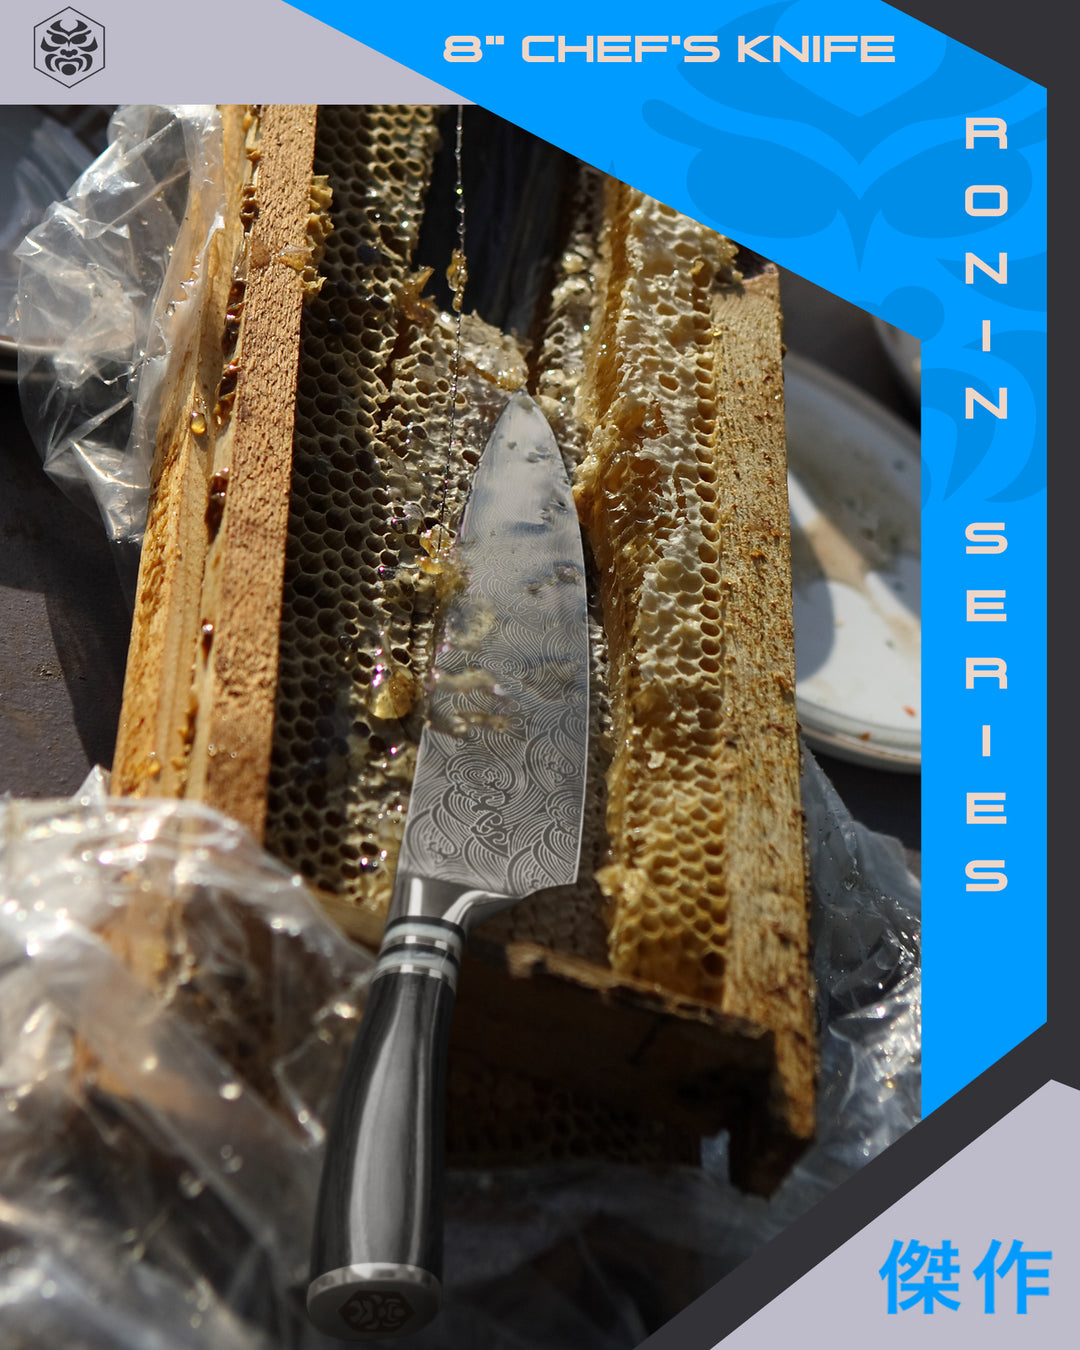 Using the Ronin Chef's Knife to break through a honeycomb.